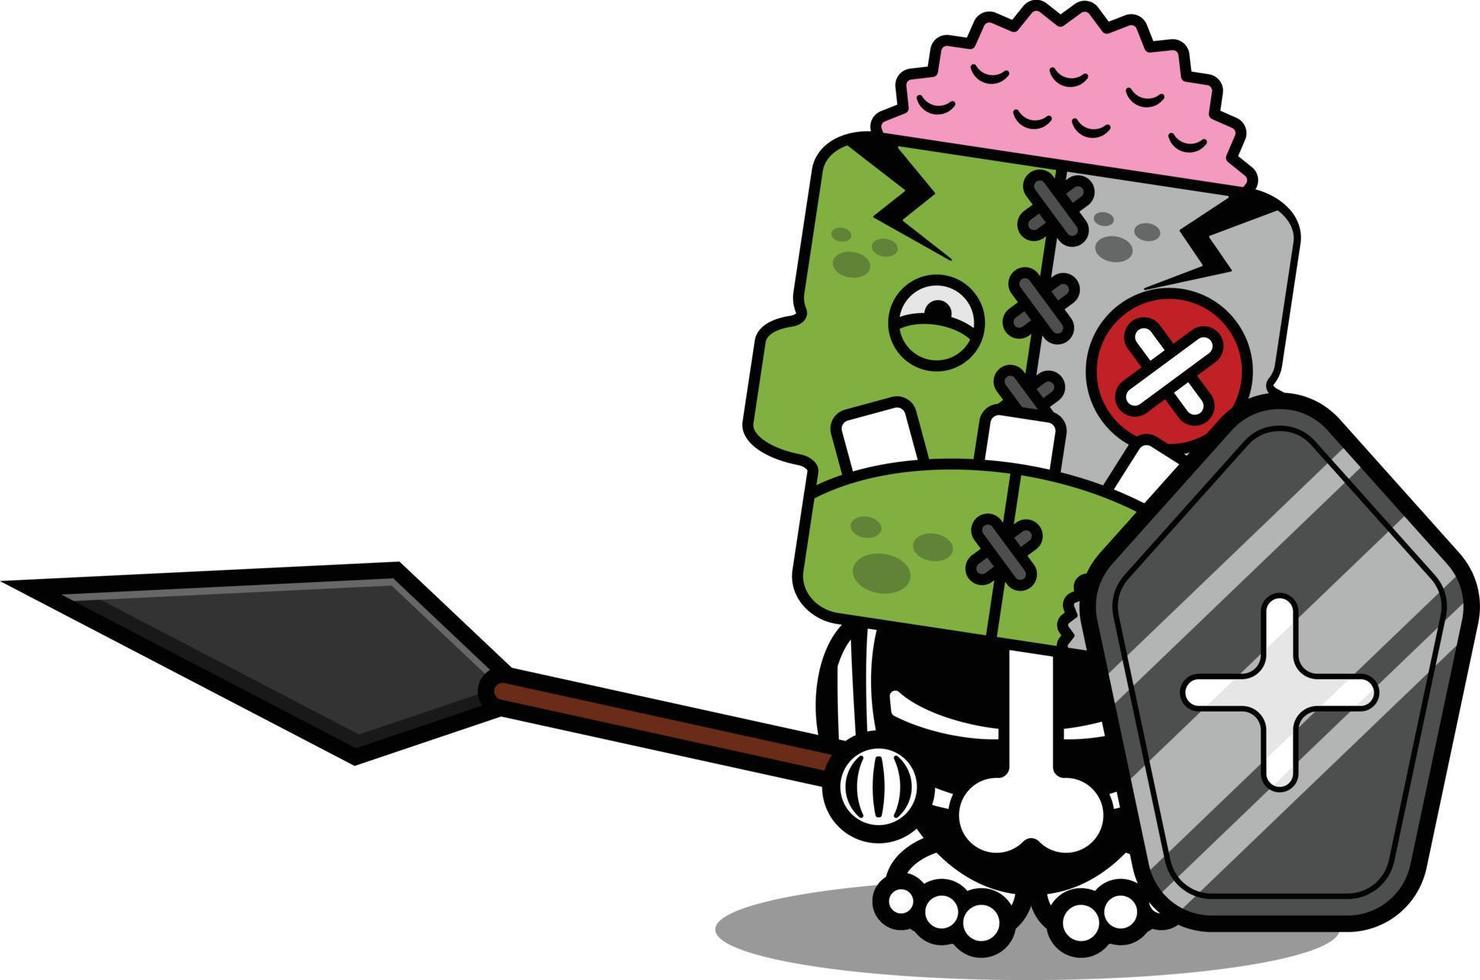 cartoon character costume vector illustration cute zombie doll mascot holding spear and shield